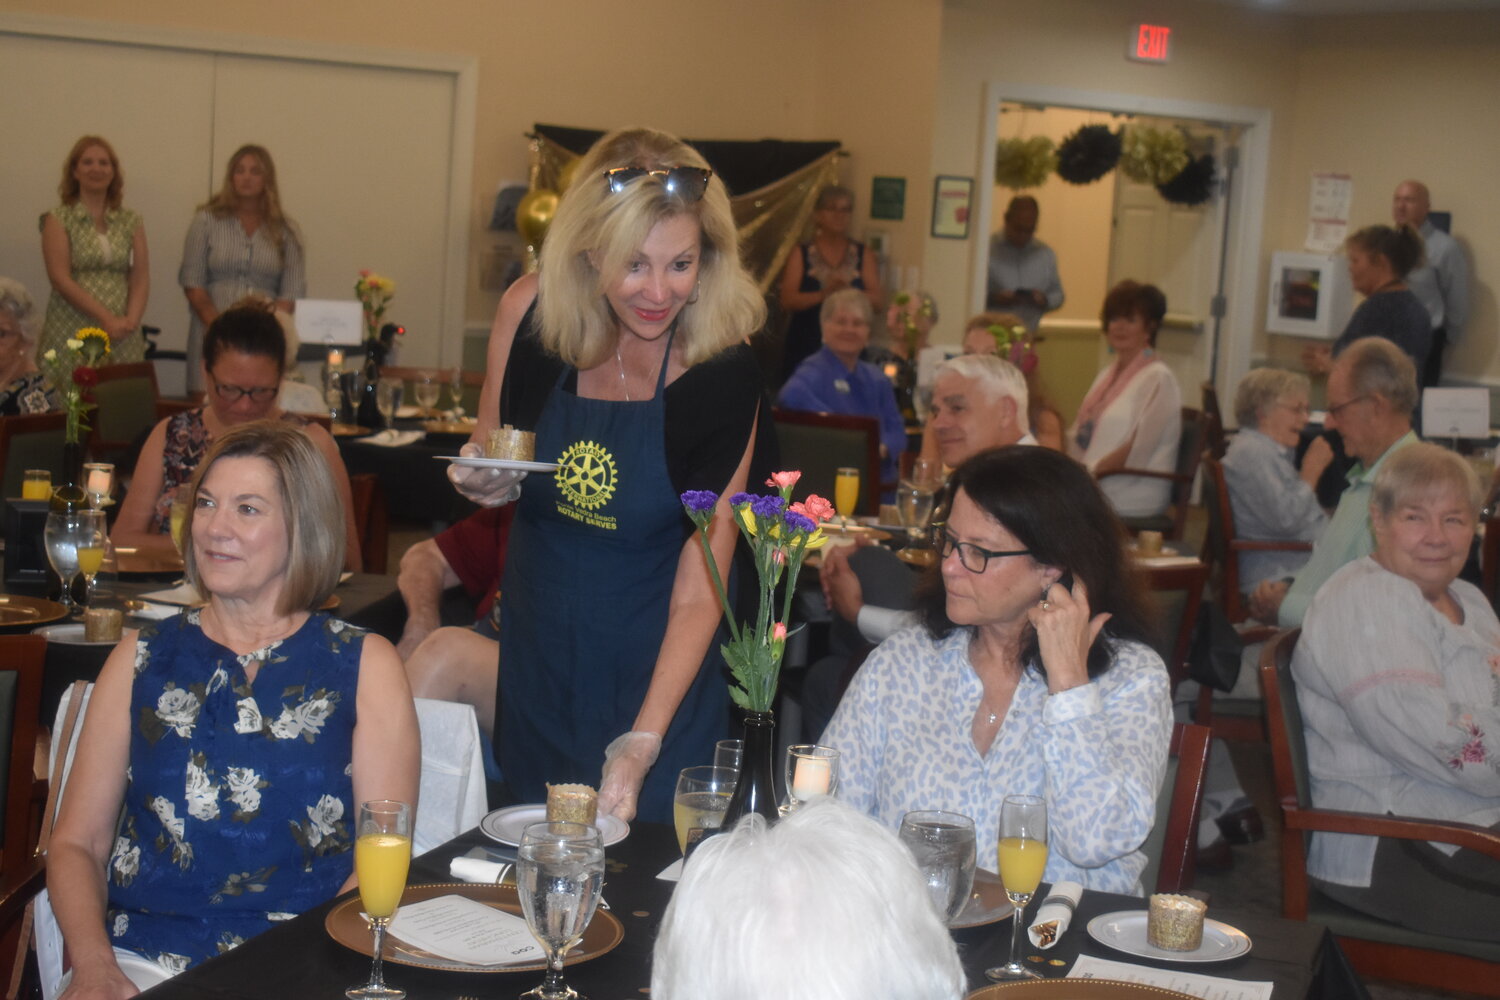 Members of the Rotary Club of Ponte Vedra Beach were on hand to serve food and present roses during the event.